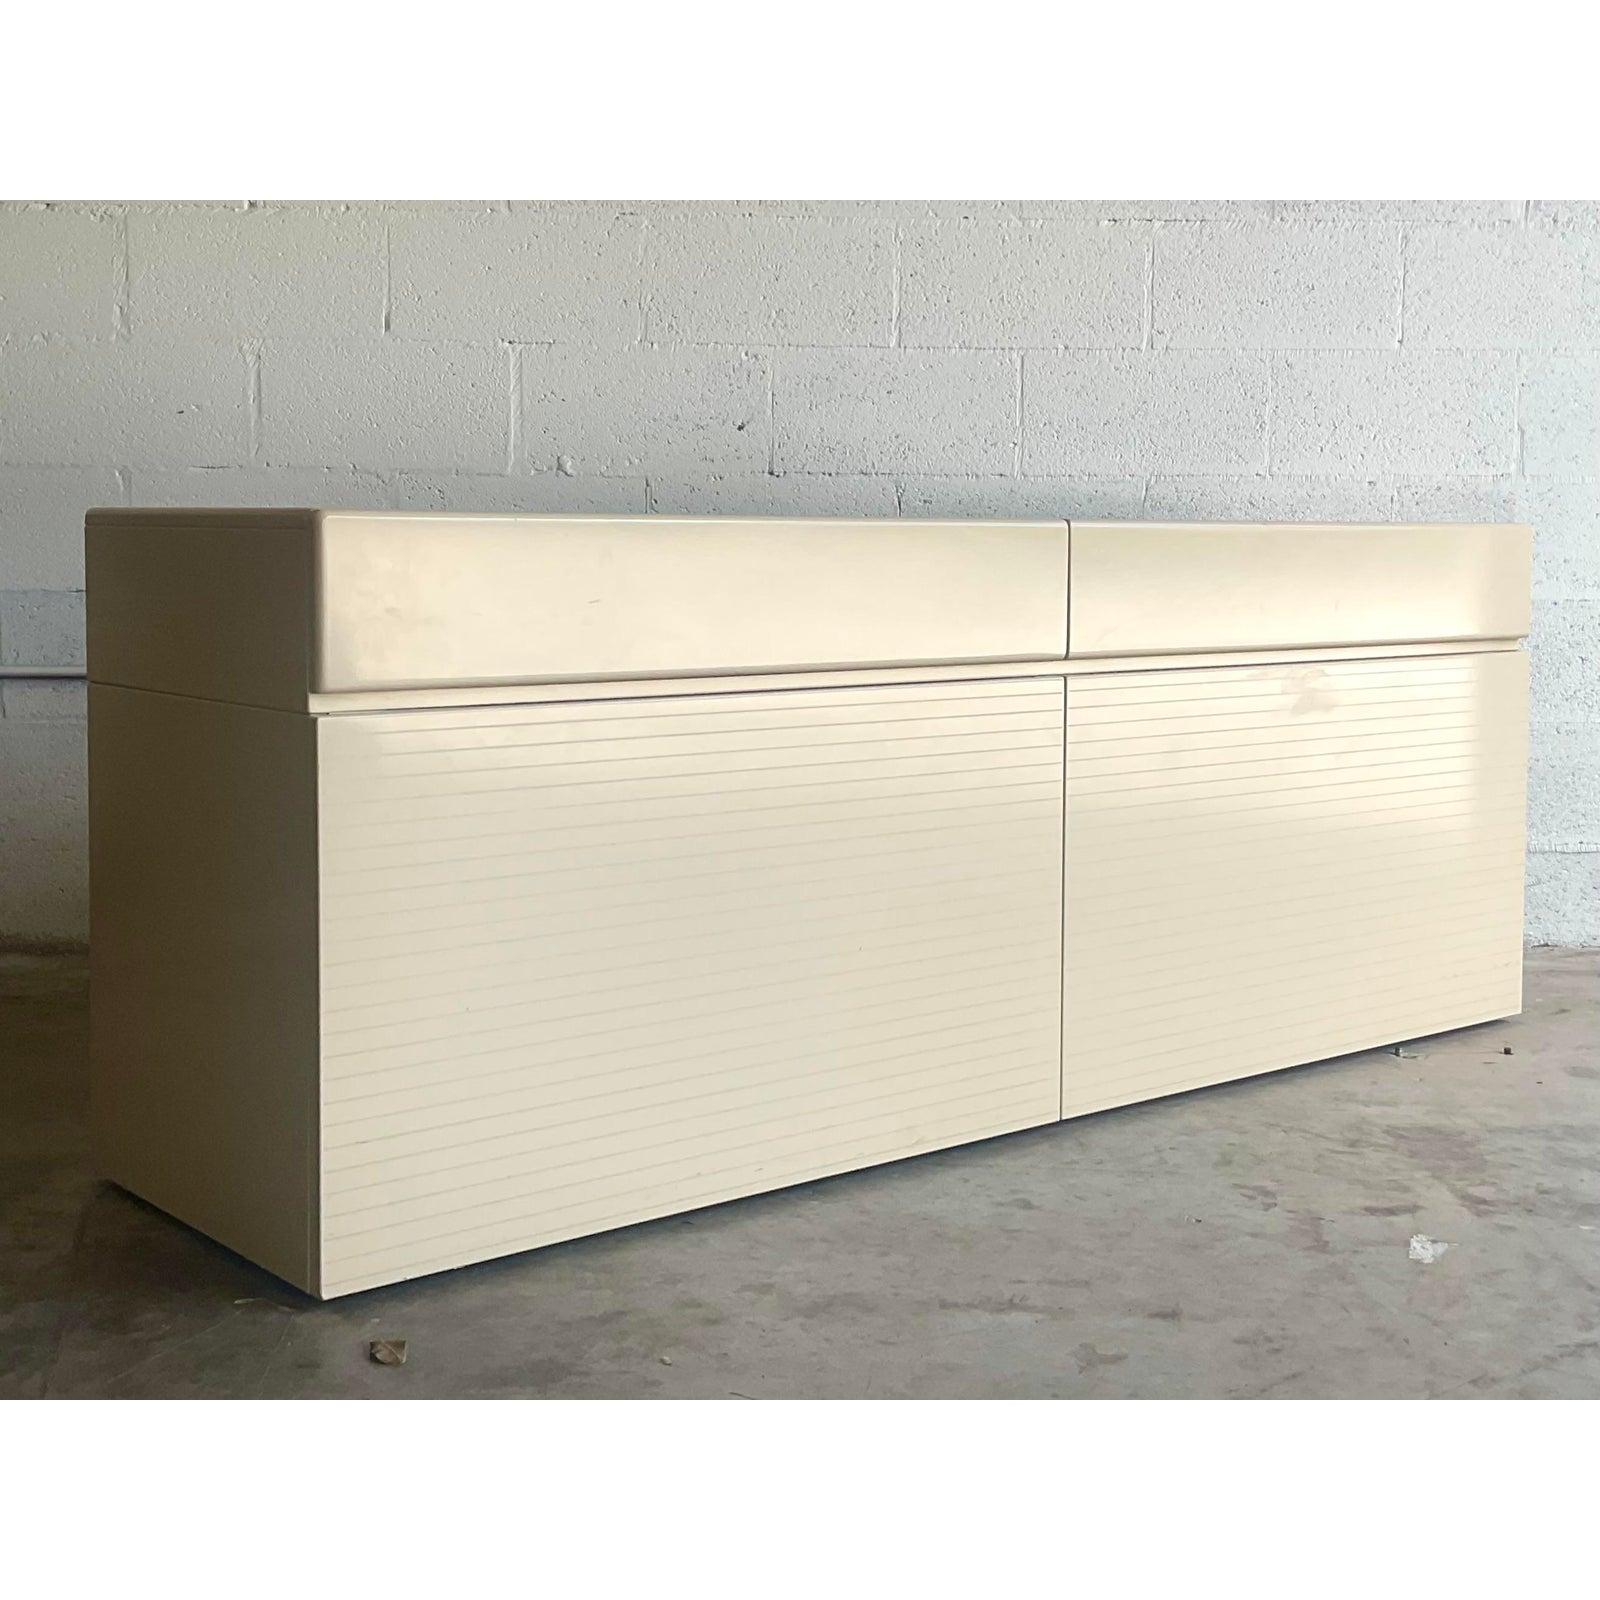 Canadian Vintage Rougier High Gloss Lacquered Stripe Credenza